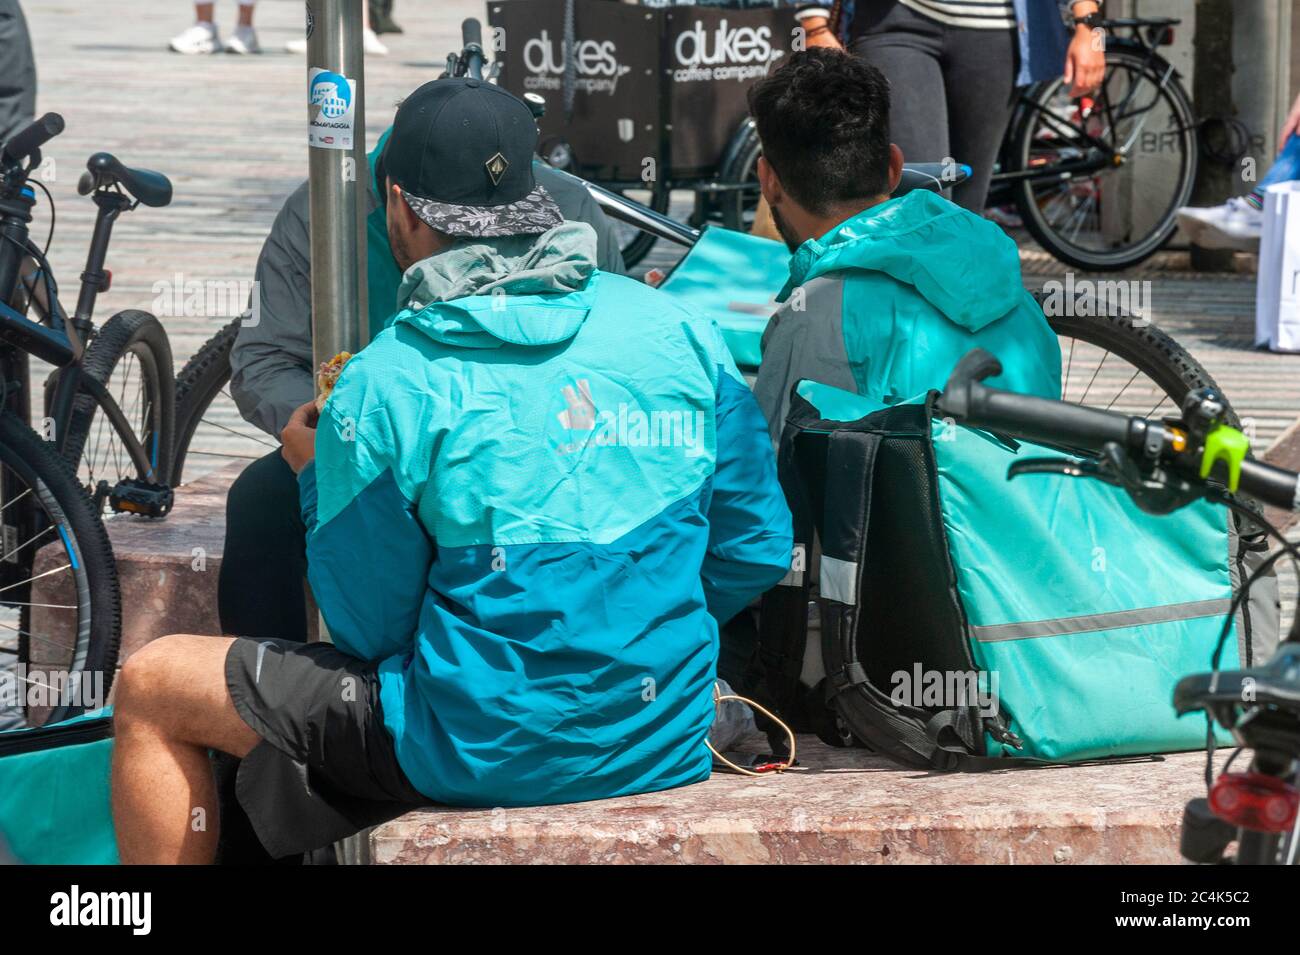 Deliveroo Food Delivery Riders in Cork City, Ireland. Stock Photo